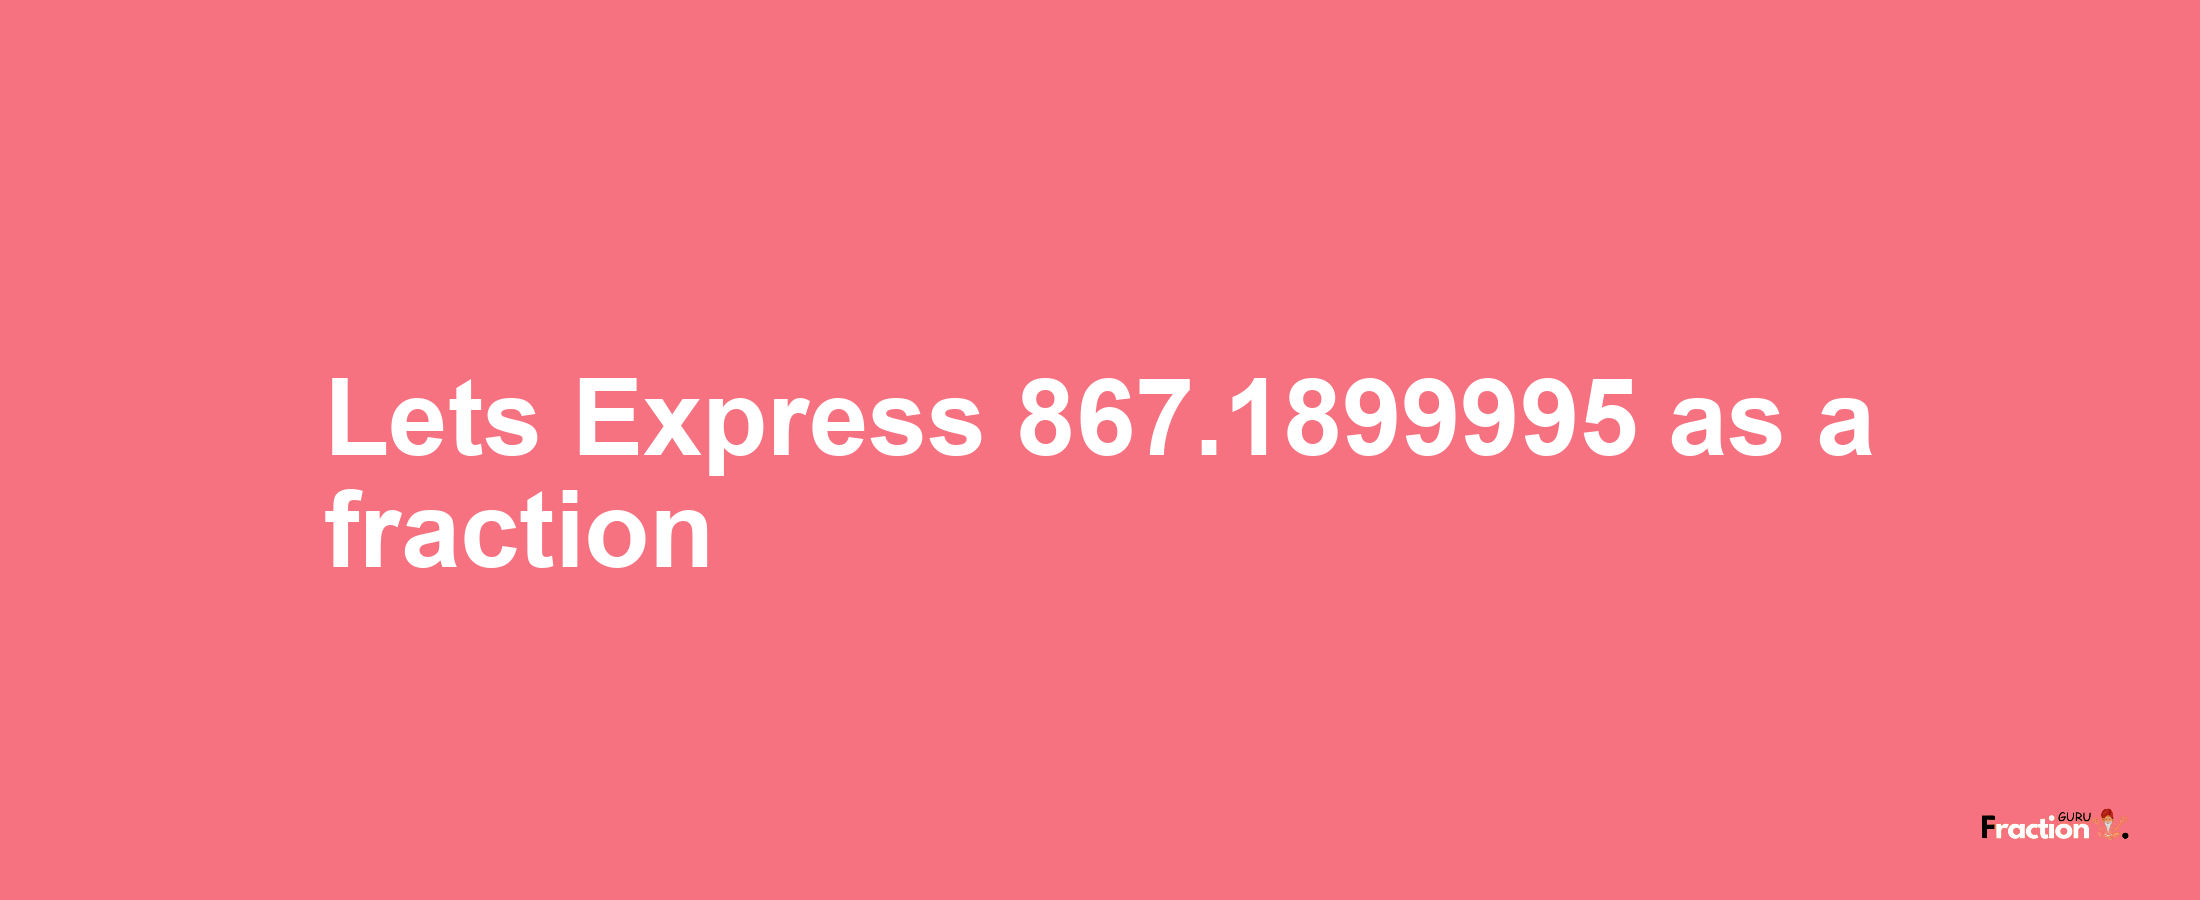 Lets Express 867.1899995 as afraction